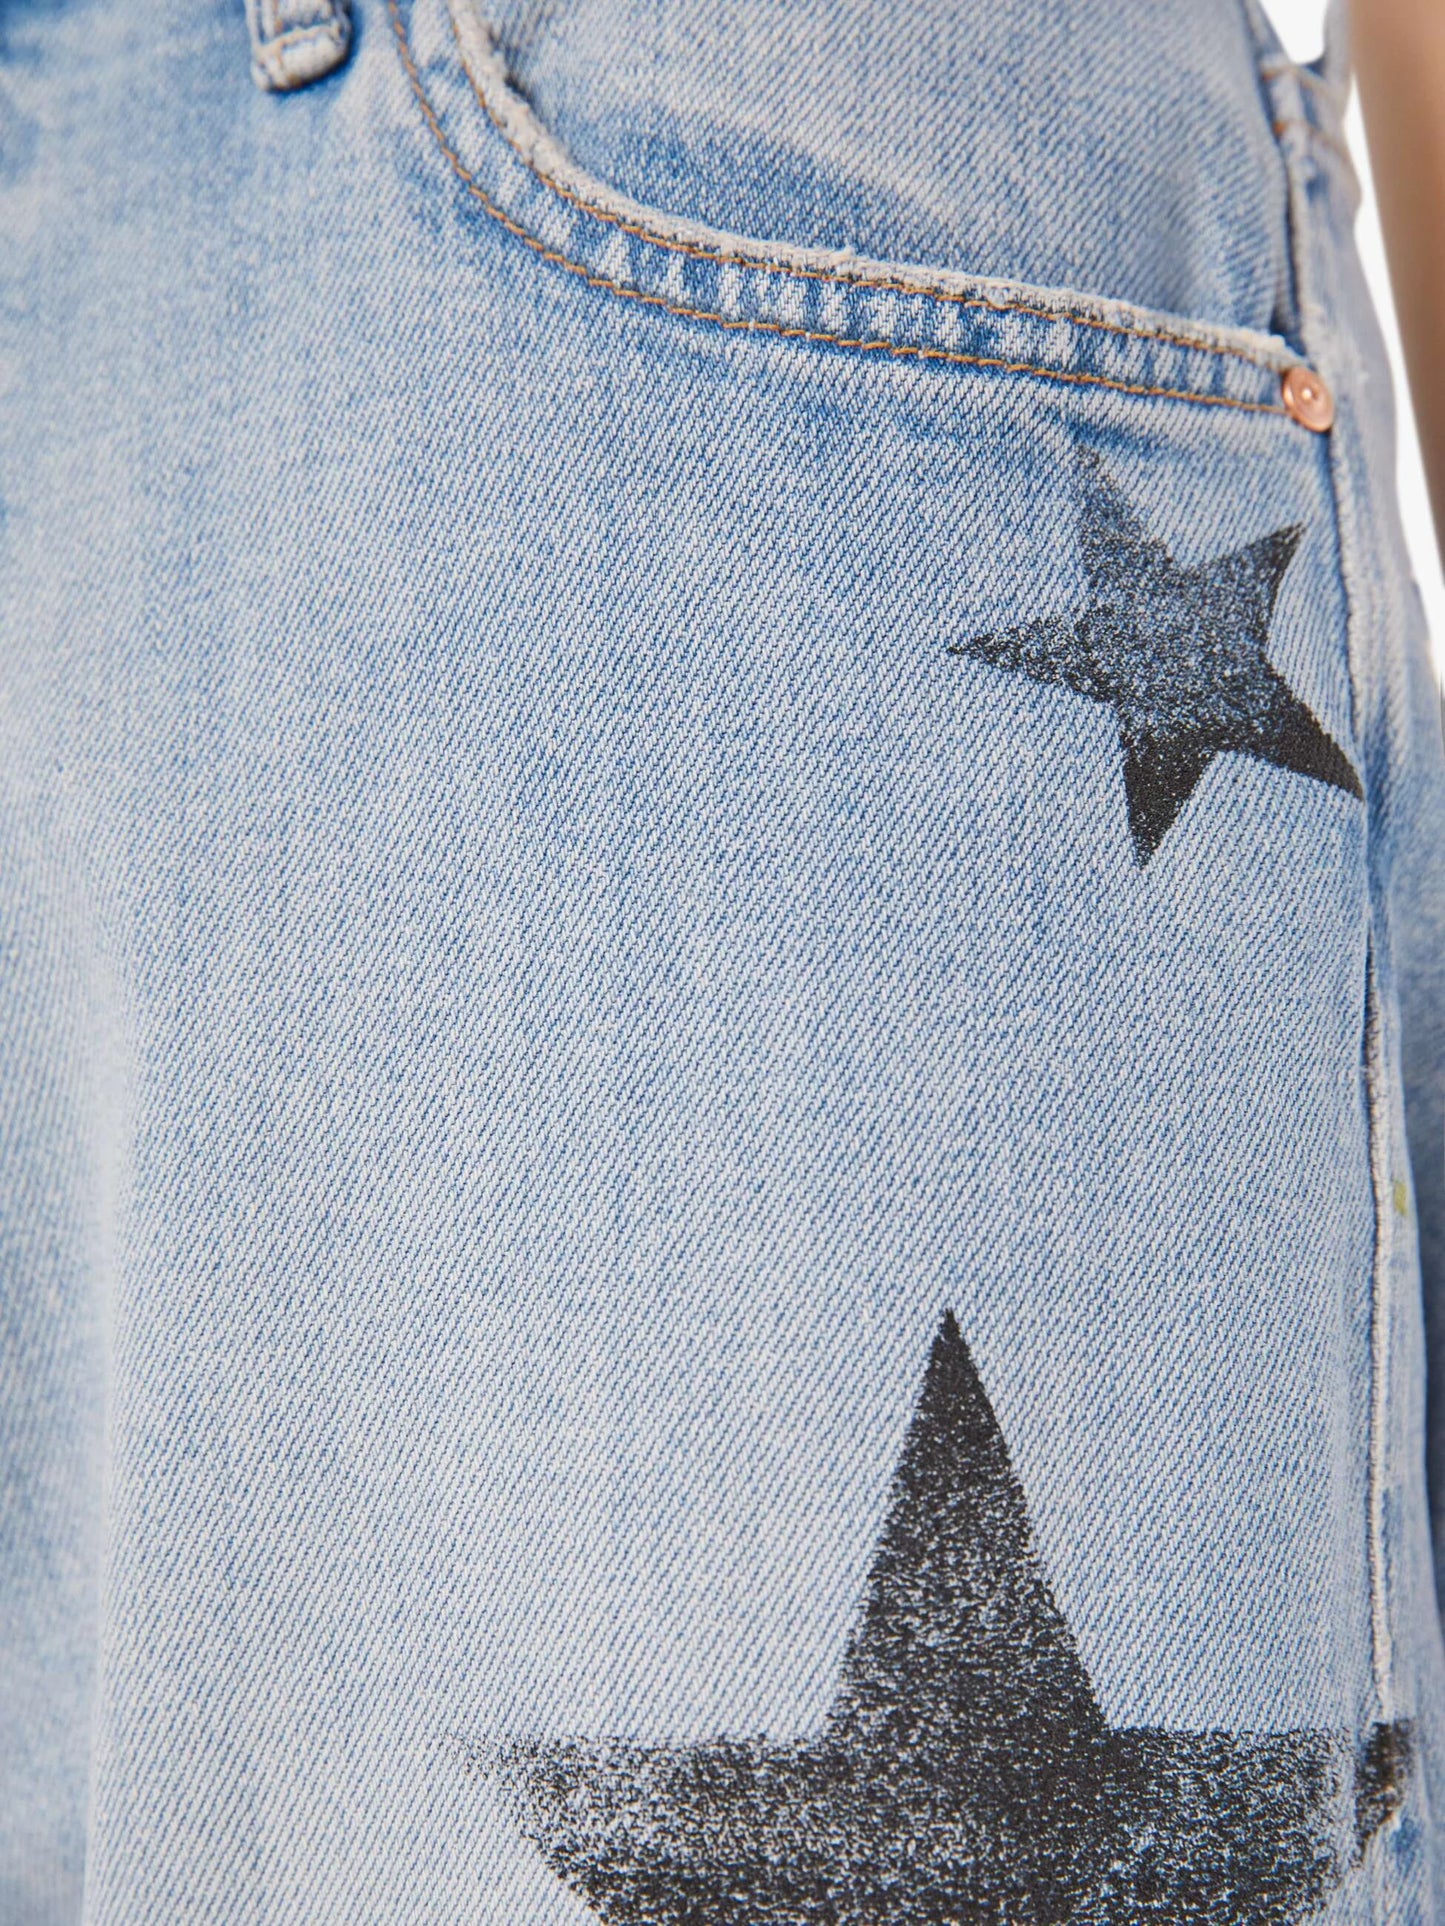 Mother - The Dodger Ankle Star Crossed Jeans